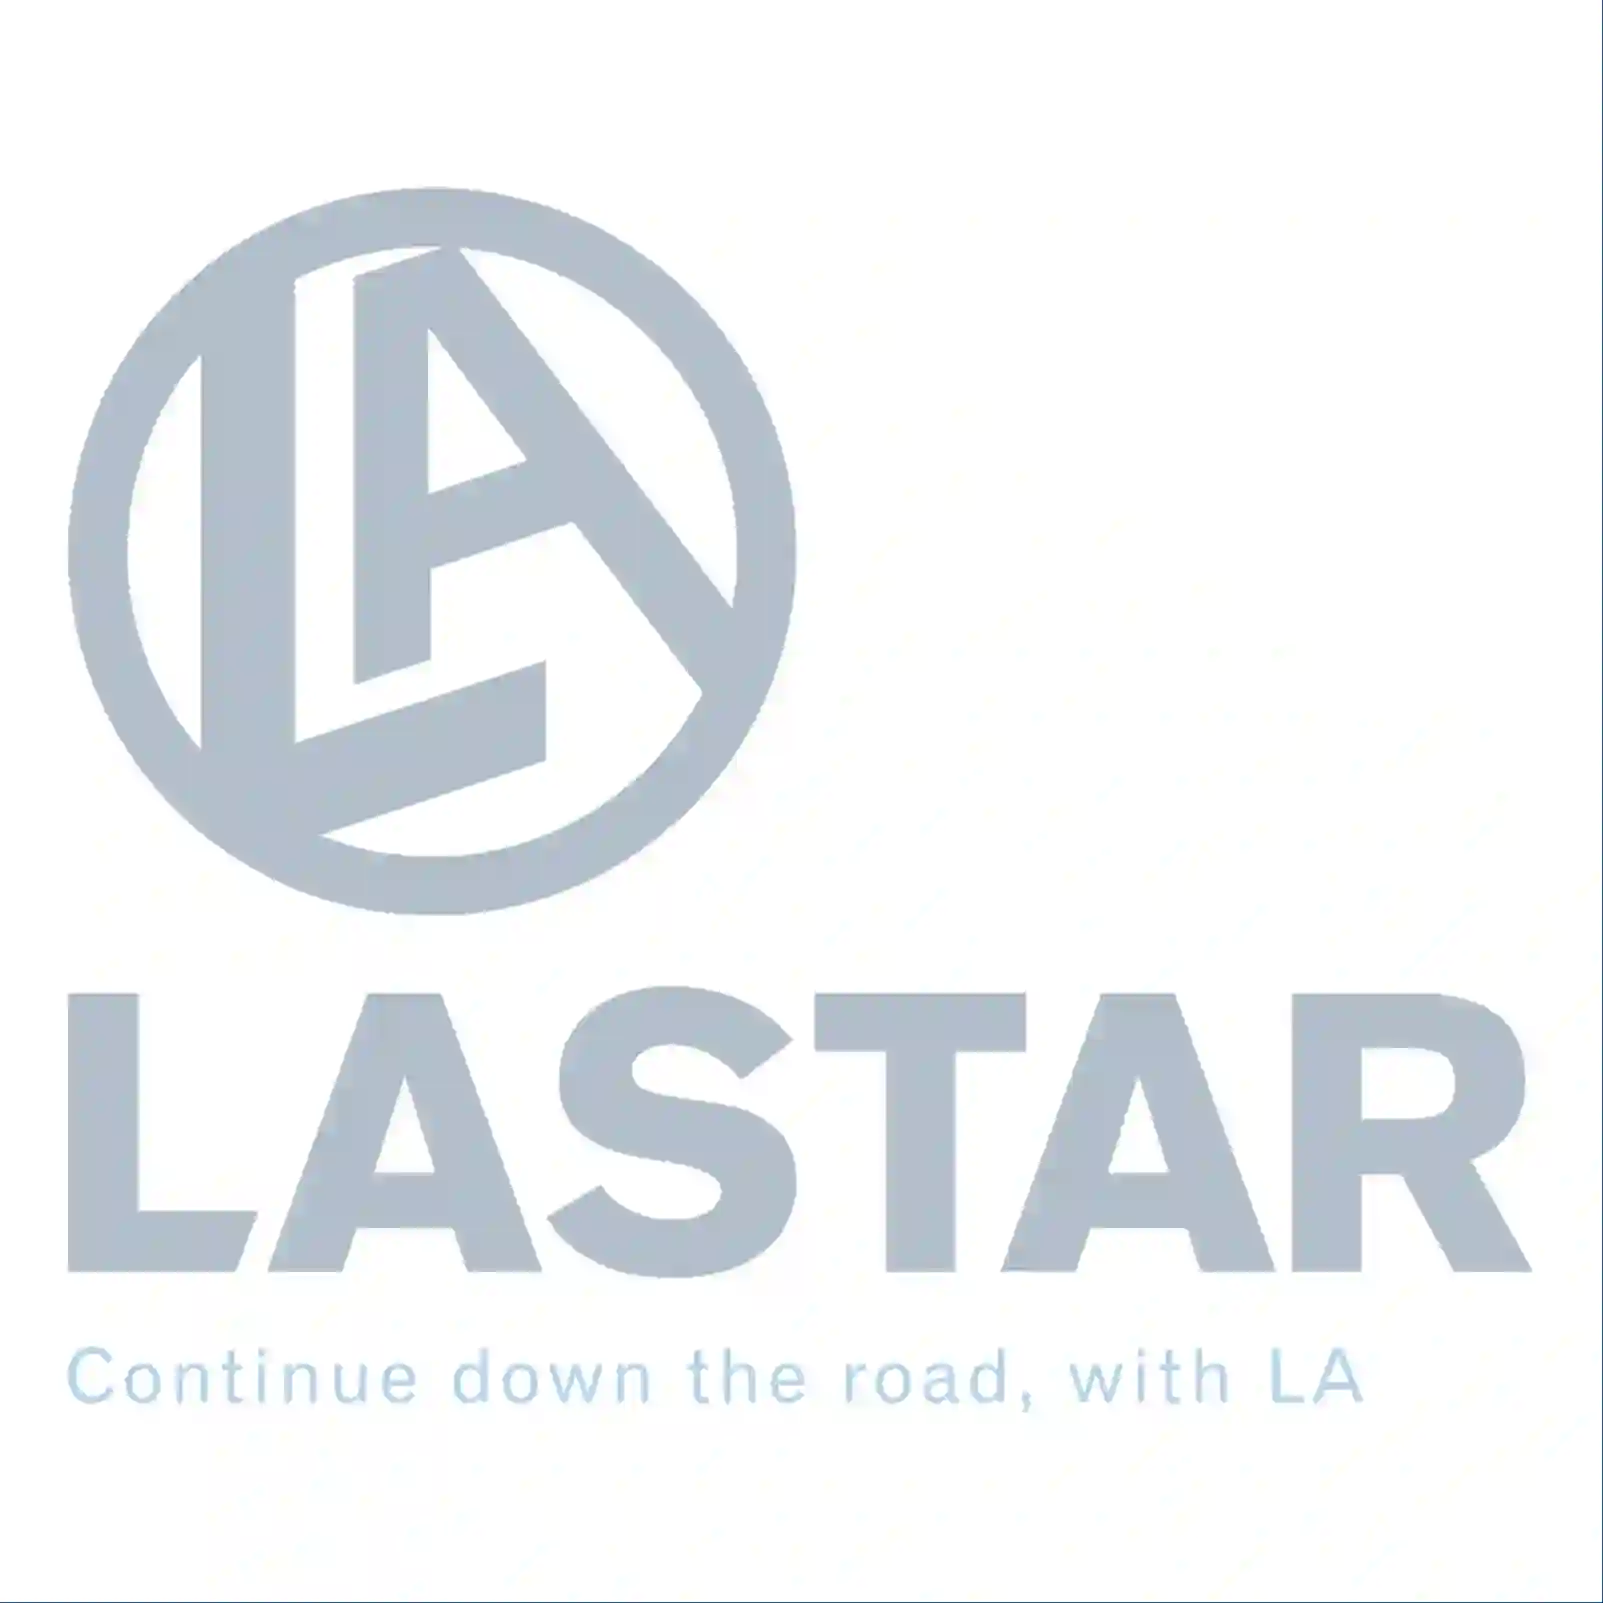 V-stay, 77728989, 81432706053, 81432709053, , , , ||  77728989 Lastar Spare Part | Truck Spare Parts, Auotomotive Spare Parts V-stay, 77728989, 81432706053, 81432709053, , , , ||  77728989 Lastar Spare Part | Truck Spare Parts, Auotomotive Spare Parts